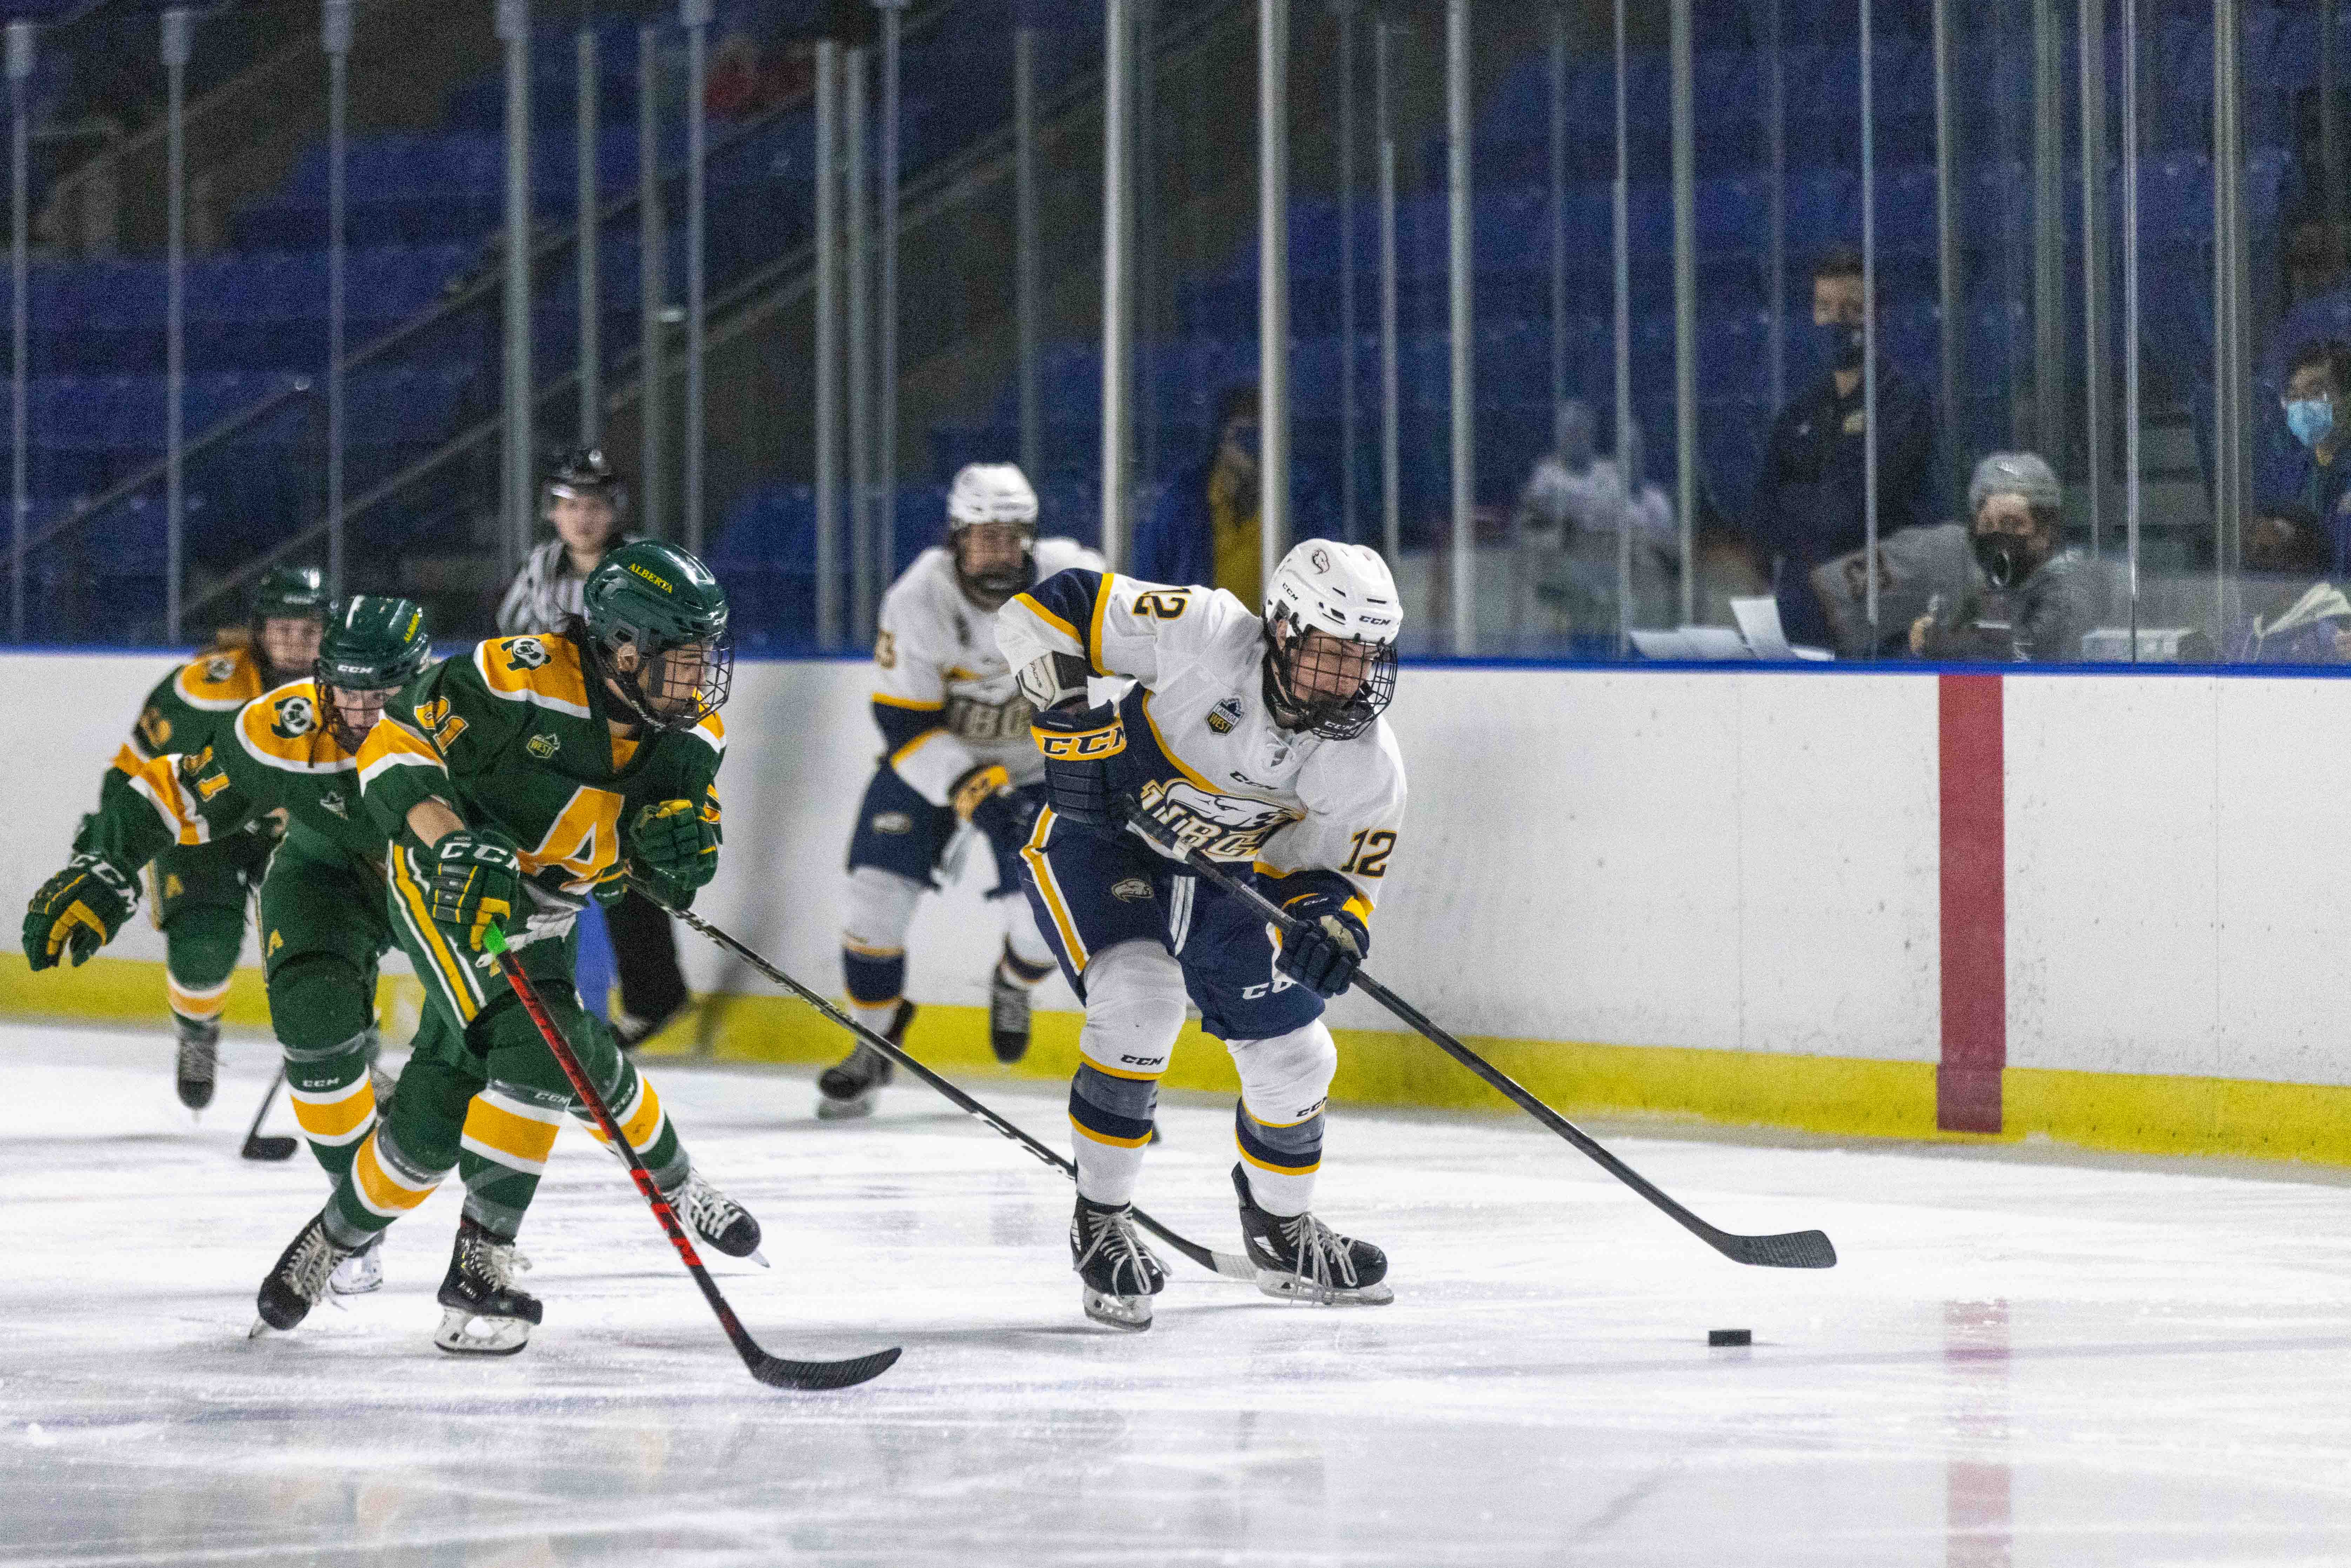 The T-Birds will come home for their last weekend series of 2021 to play against Mount Royal University hoping to end the year off on the high note.